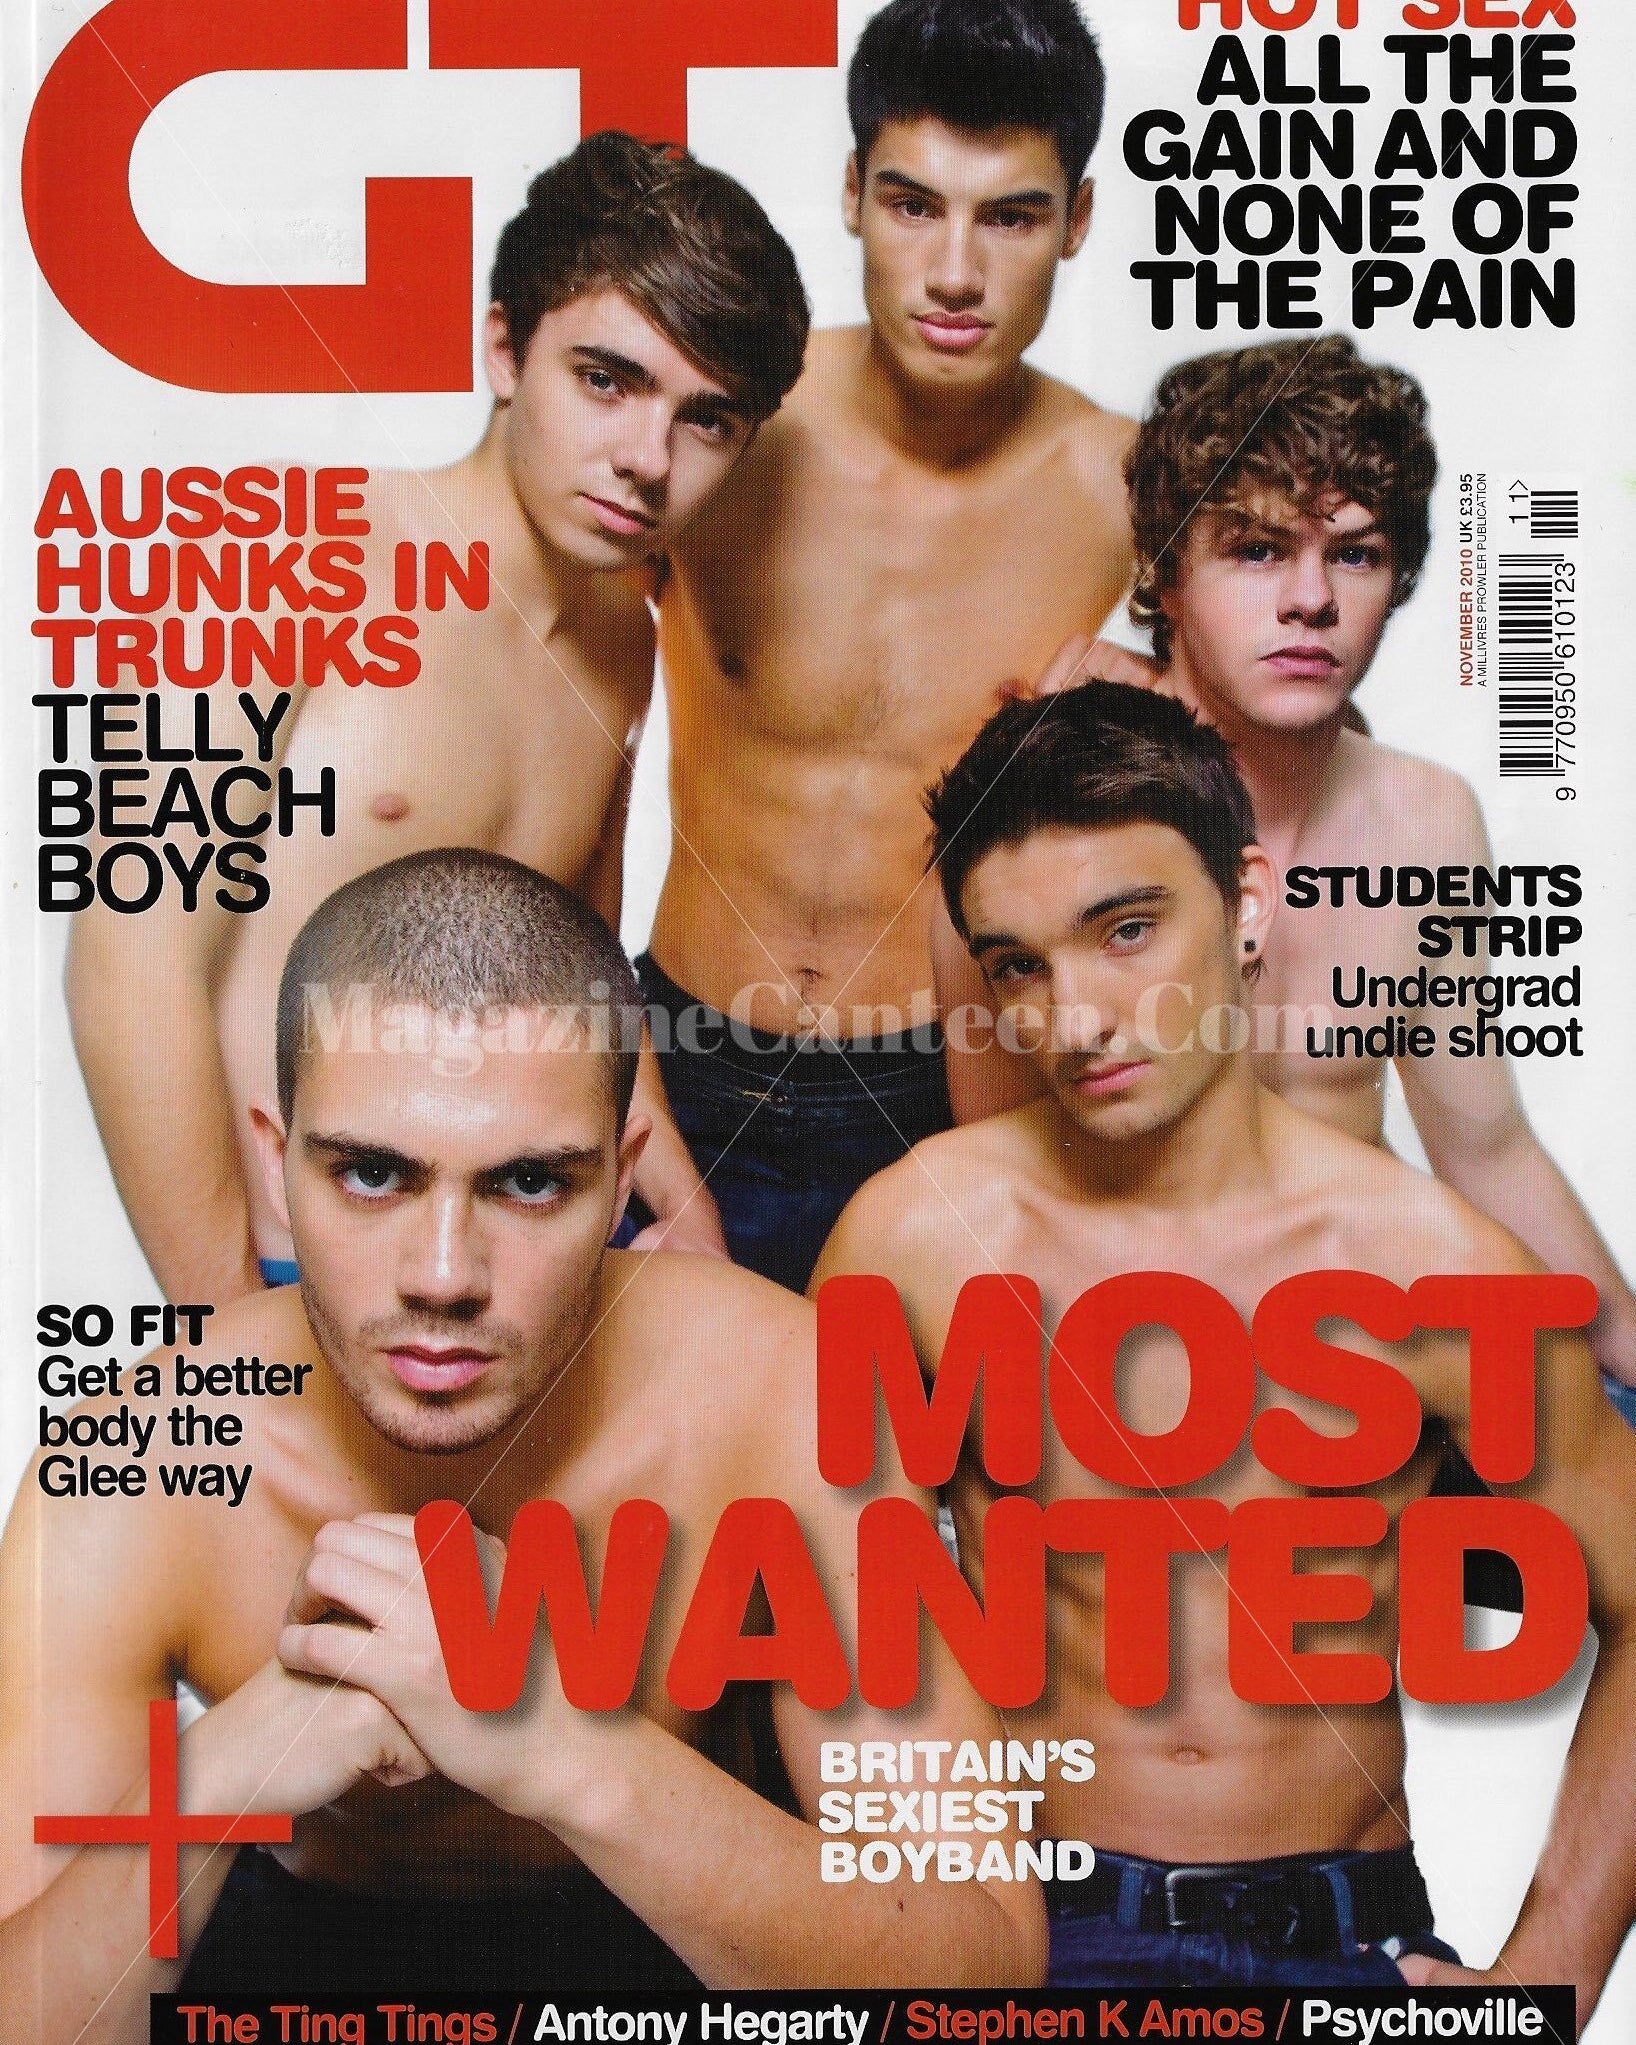 Gay Times Magazine - Max George & The Wanted 